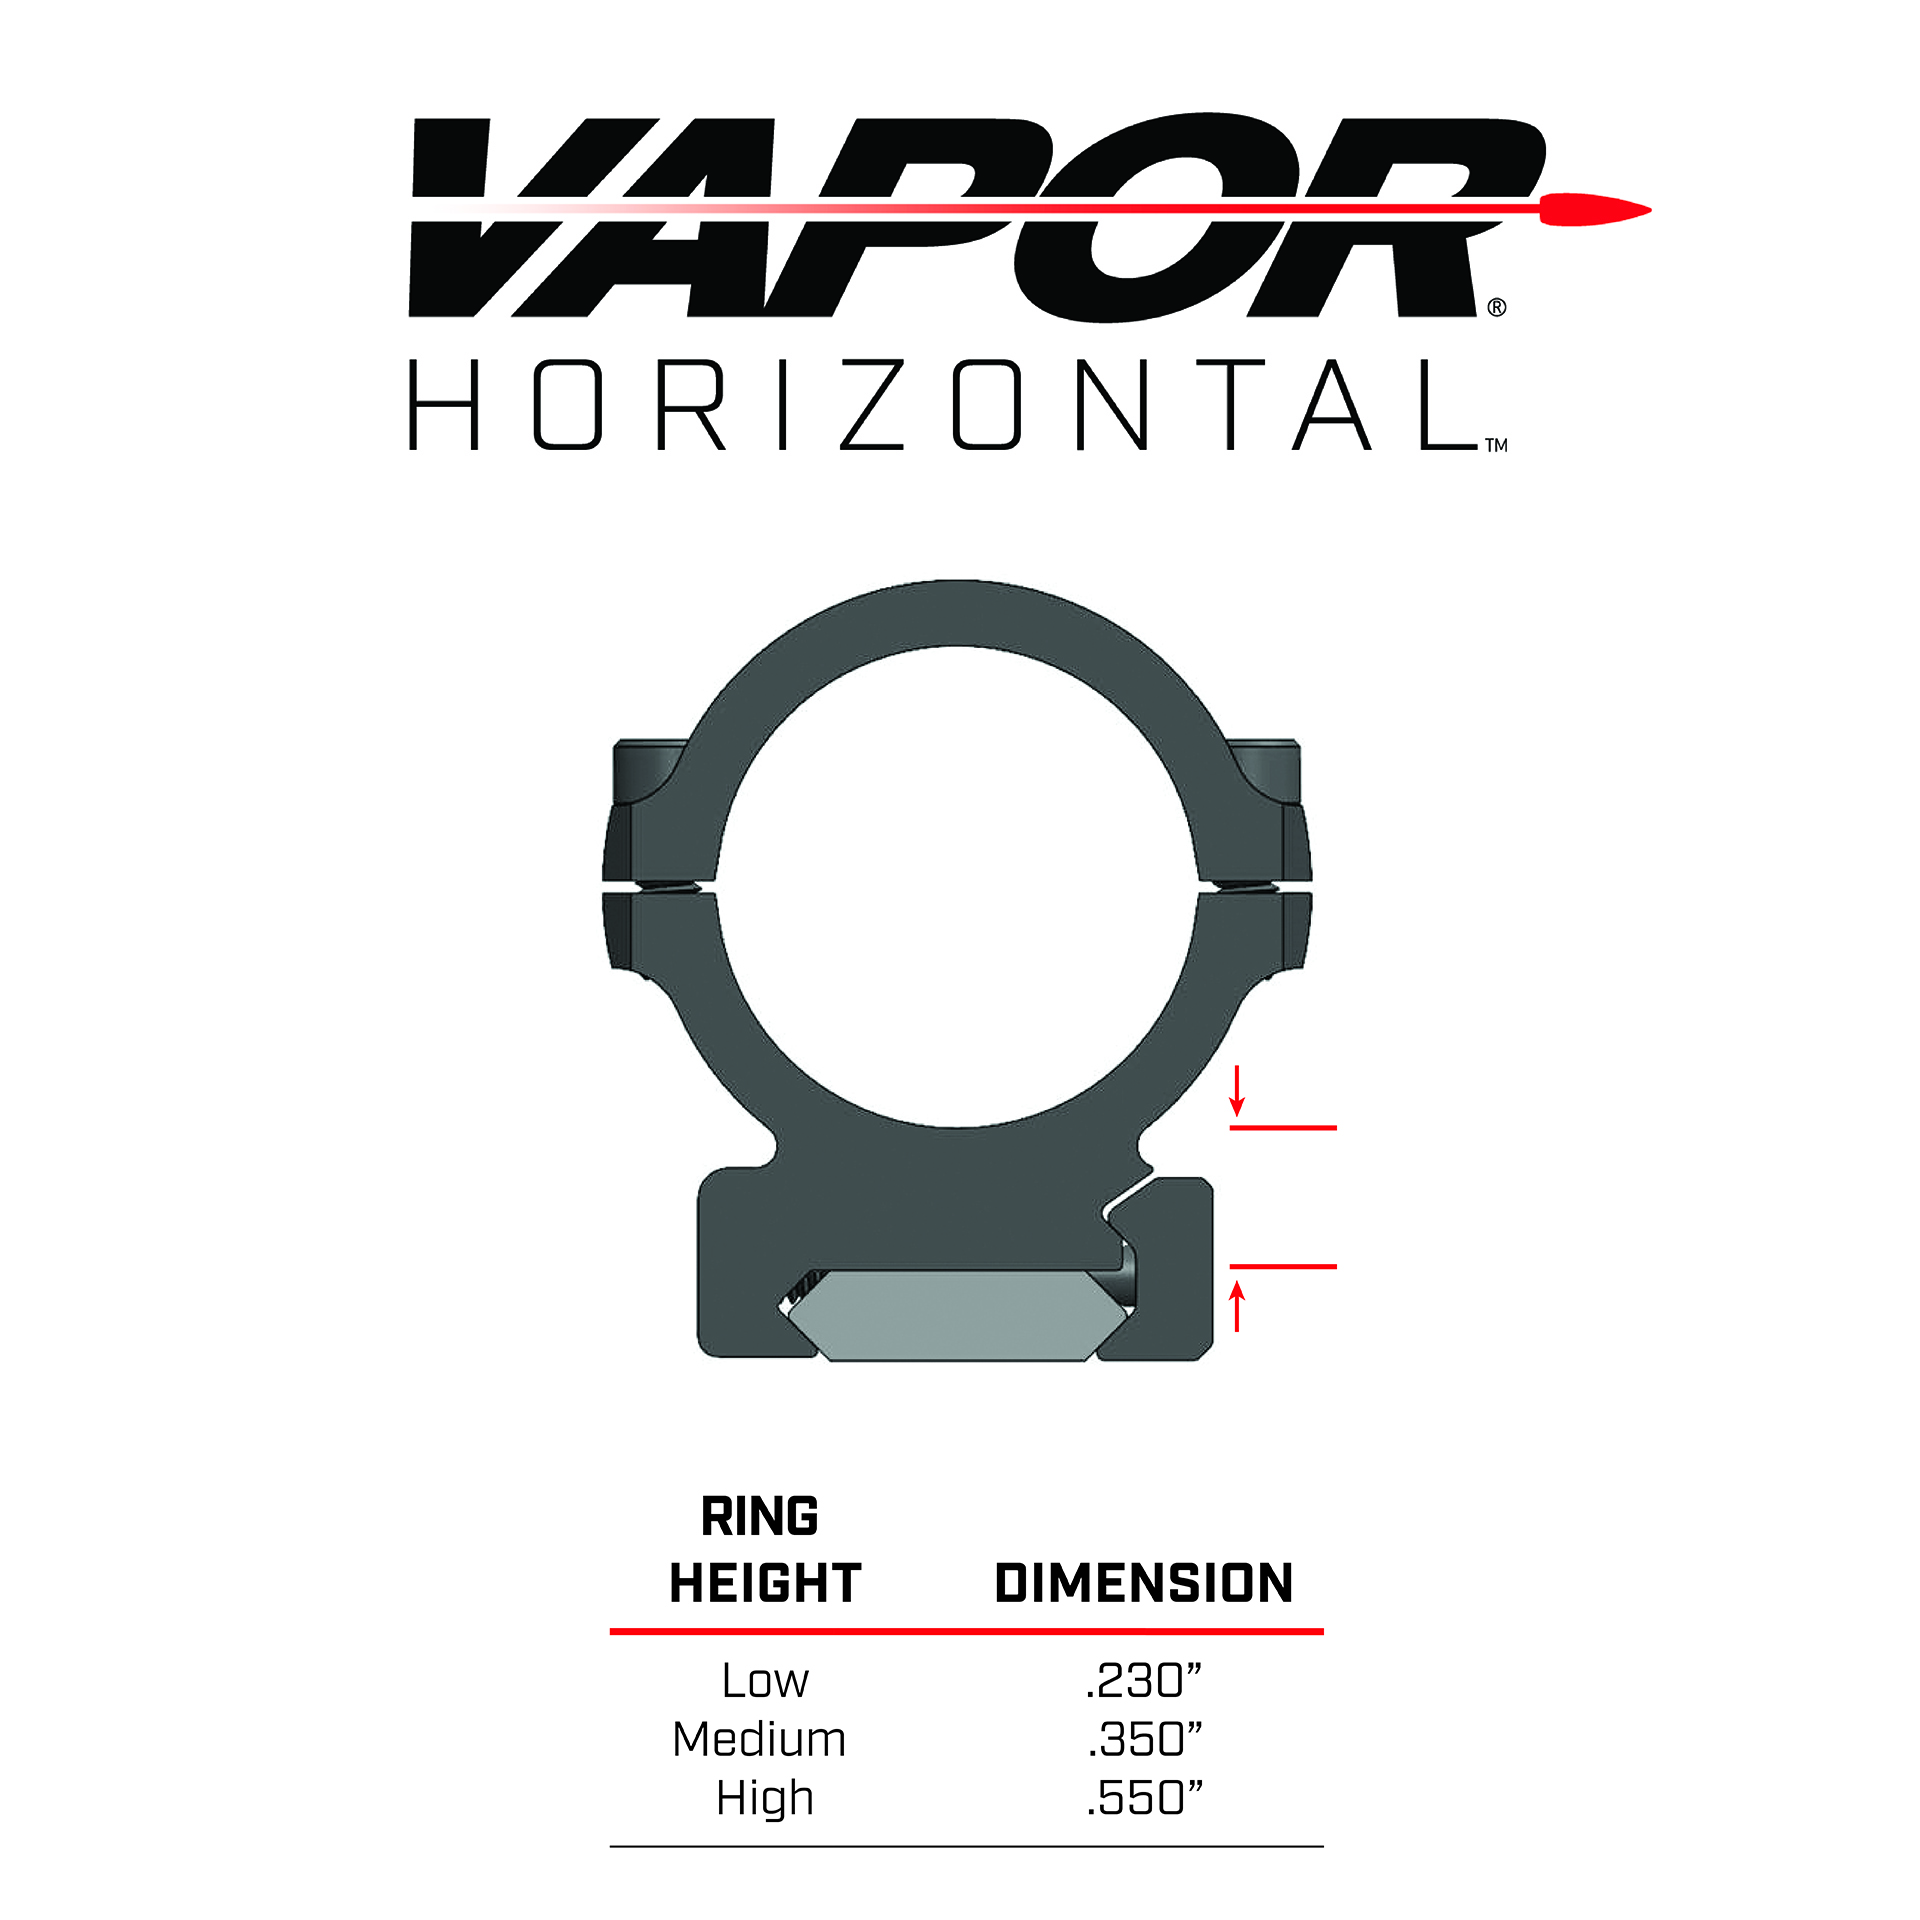 height for vapor horizontal scope rings. low .230 inch, med .350 inch, high .550 inch